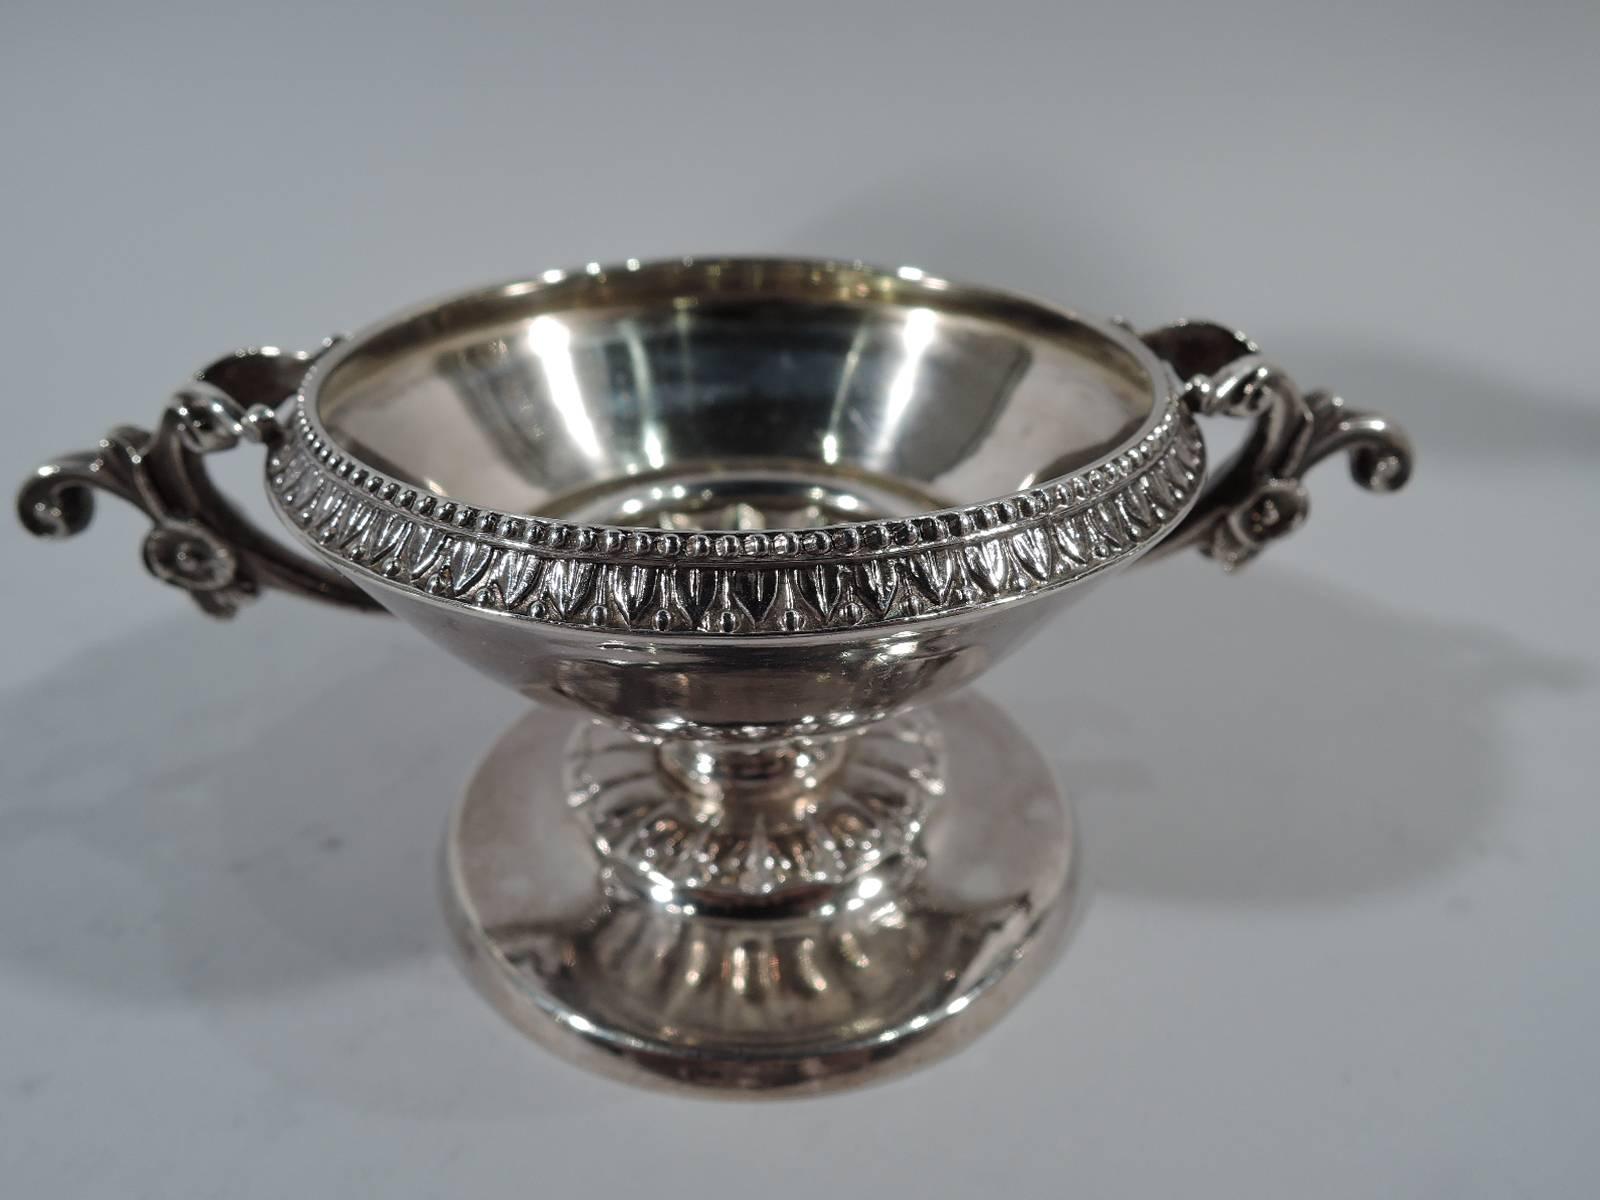 Pair of Classical sterling silver open salts. Made by William Gale in New York in 1862. Each: Conical bowl has raised leaf-and-dart rim and repousse fluting on underside as well as side handles with flowers and split mounts. Circular foot with